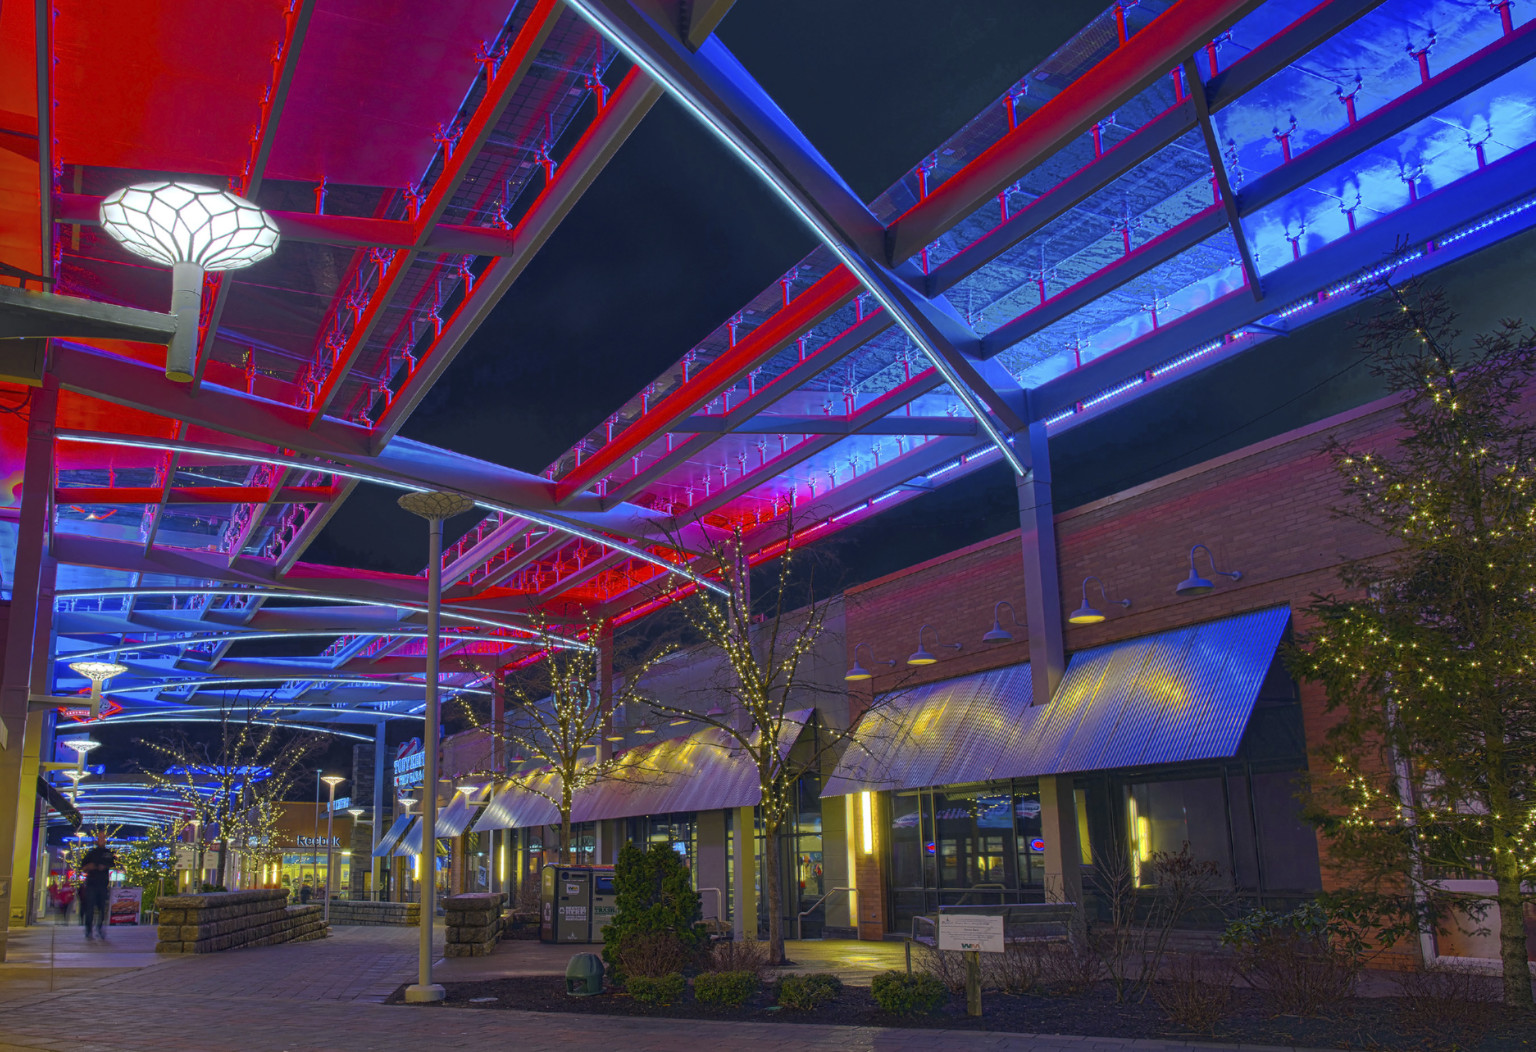 Patriot Place, located in New England Patriot's Gillette Stadium, walkway lined with red and blue LED display canopy